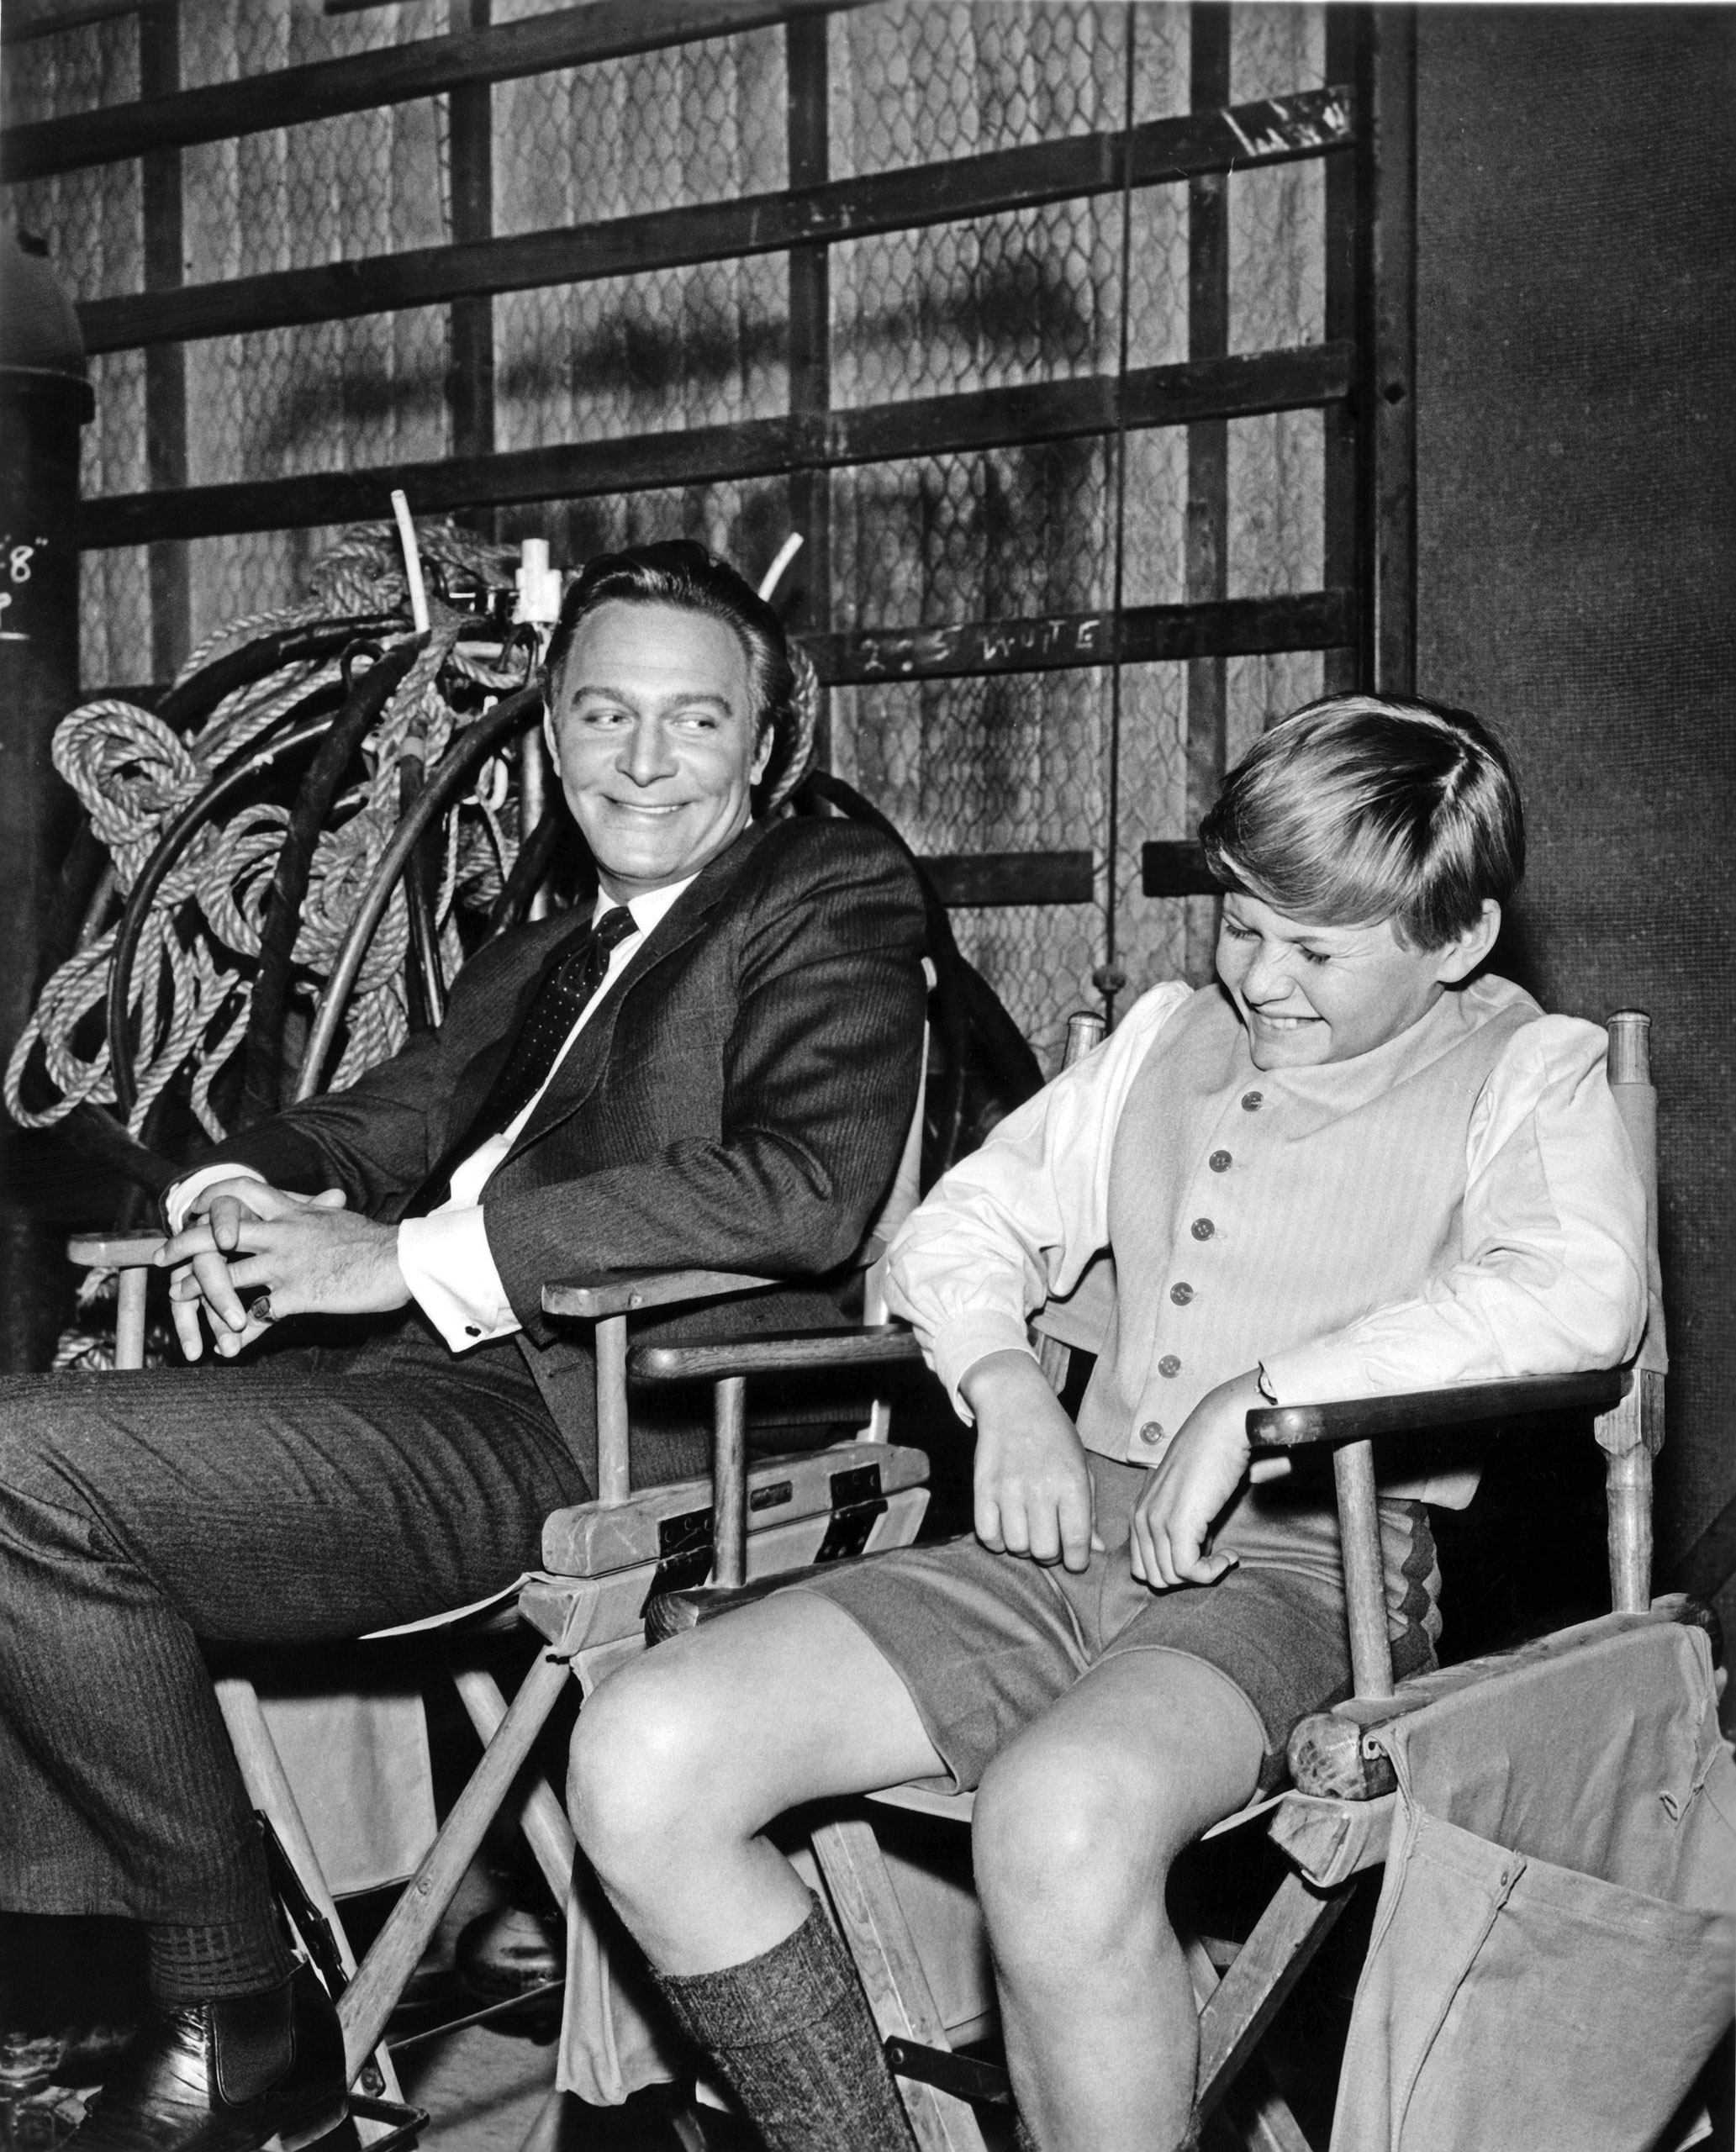 Christopher Plummer and Duane Chase on the set of The Sound of Music.